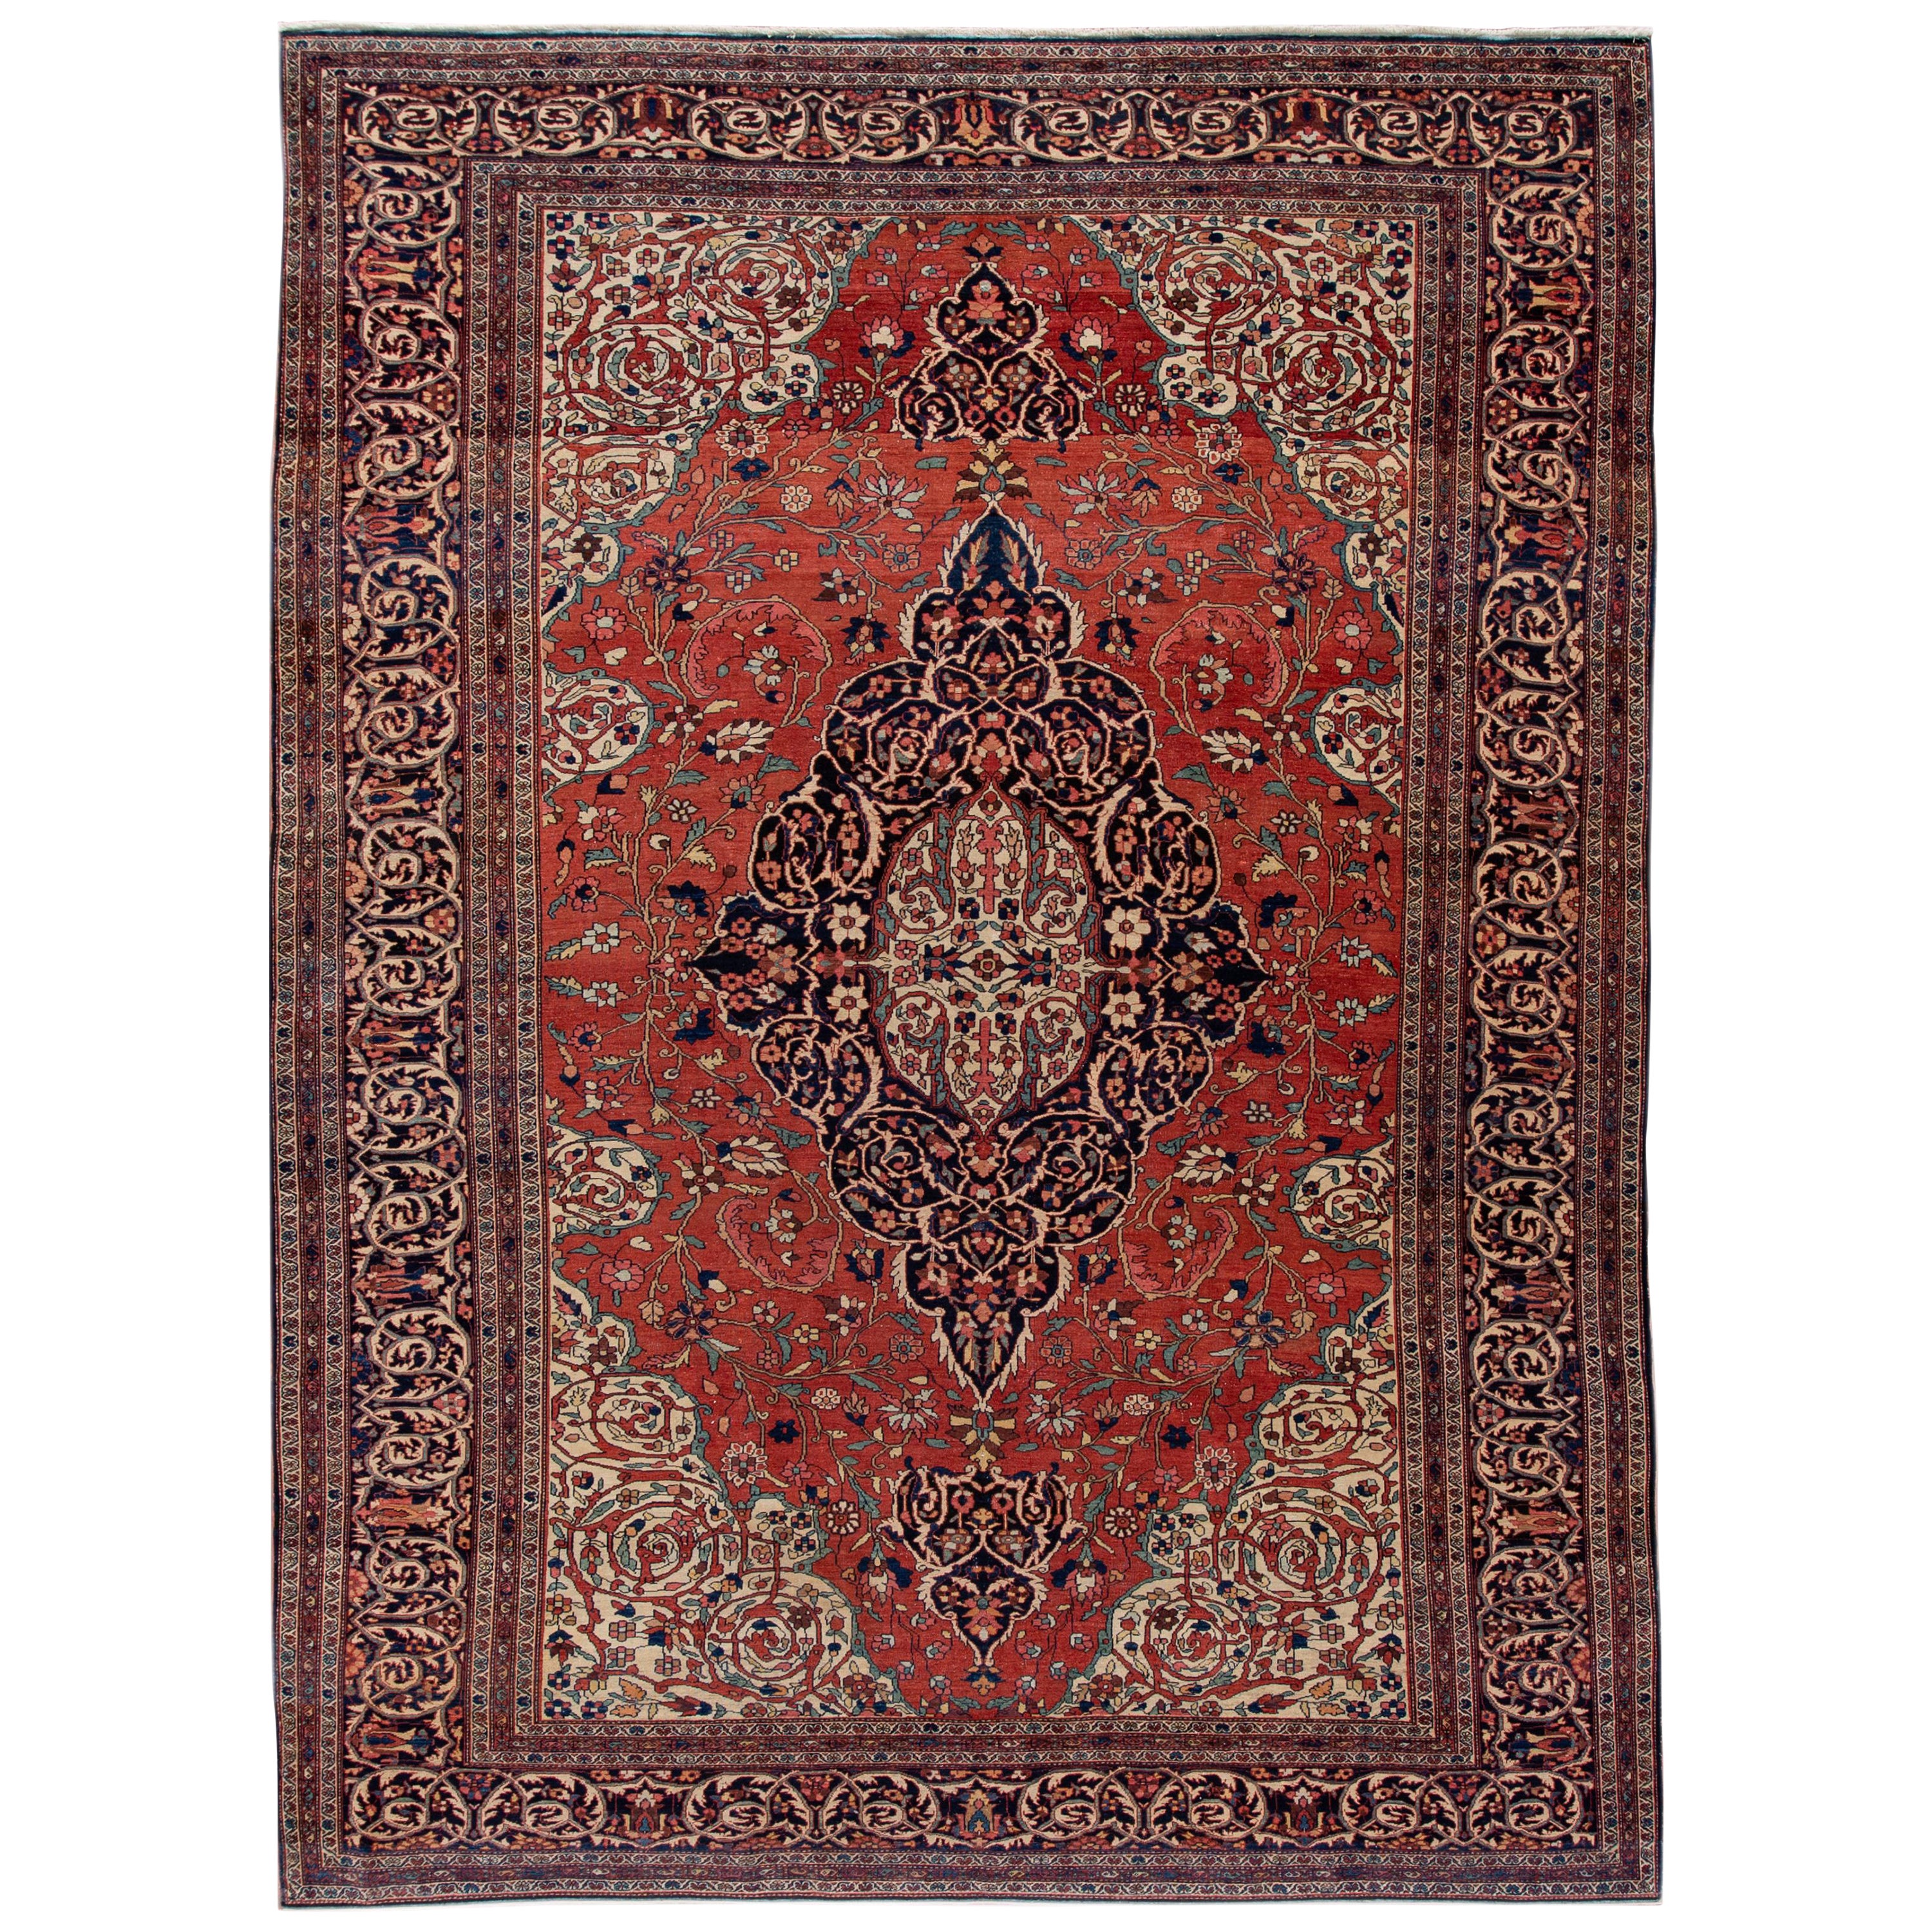 Antique Red Sarouk Farahan Persian Room Size Wool Rug With Medallion Motif For Sale